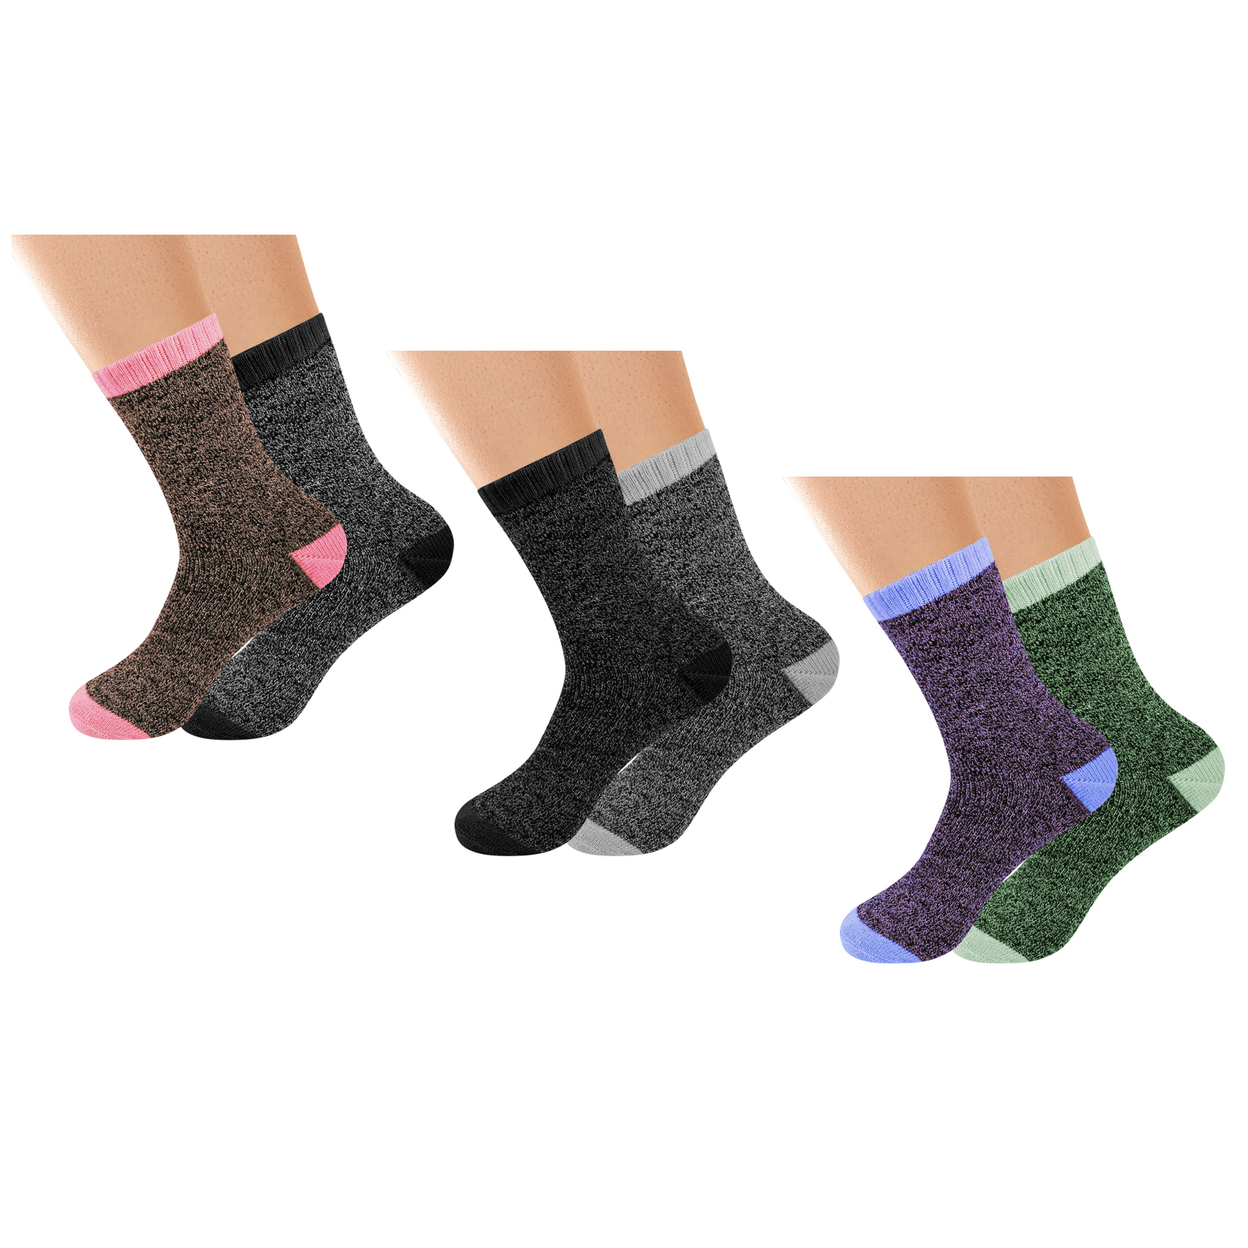 3-Pairs: Women's Winter Warm Thick Soft Cozy Thermal Boot Socks